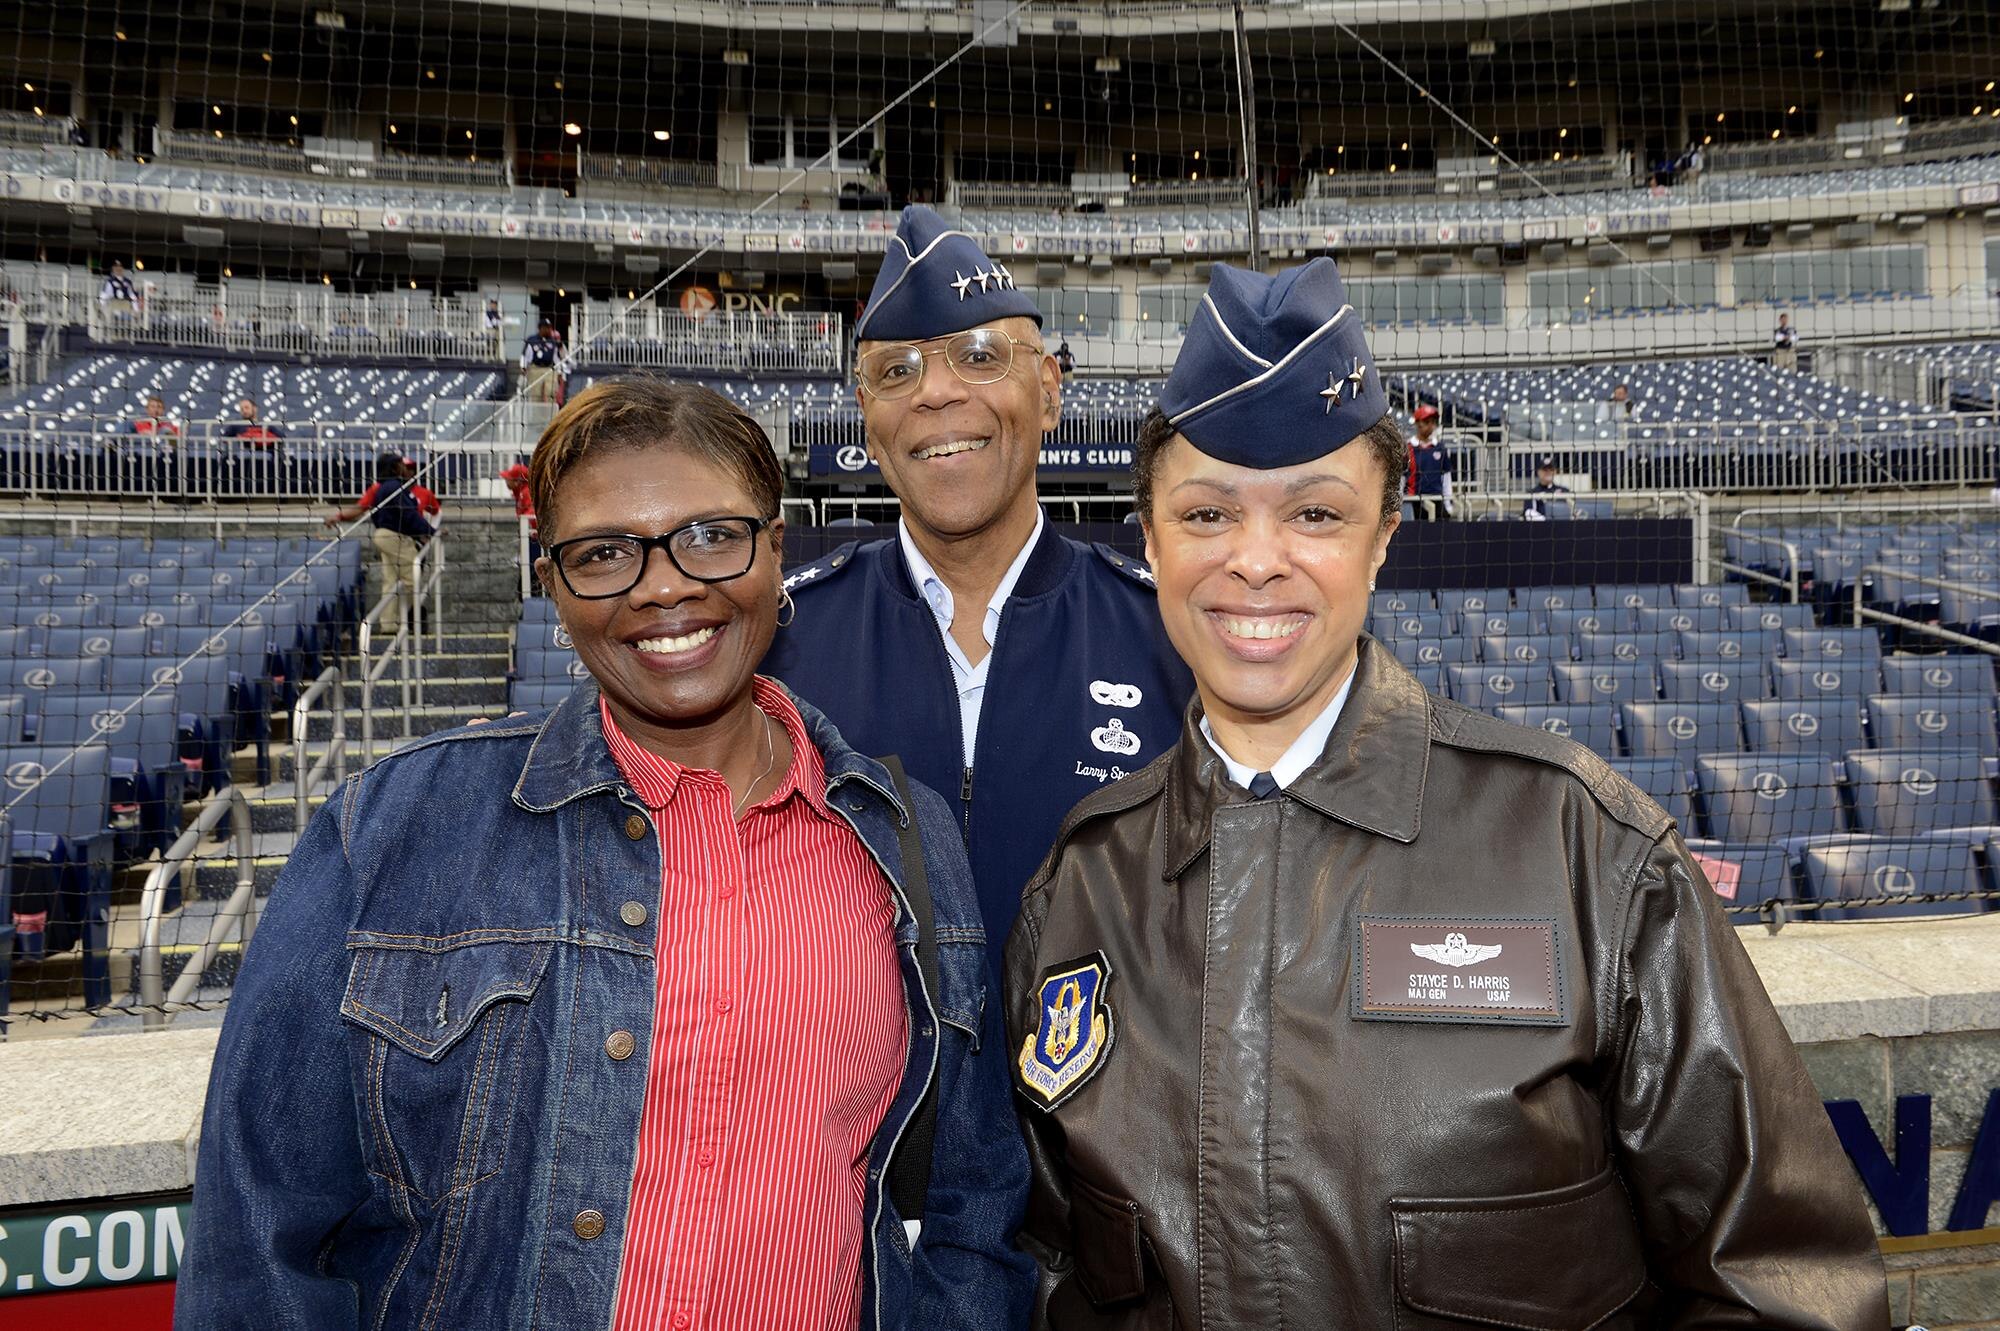 Air Force Vice Chief of Staff Gen. Larry O. Spencer, his wife, Ora, and Maj. Gen. Stayce D. Harris, the commander of the 22nd Air Force, Air Force Reserve Command pose for a picture before the Washington Nationals vs. Philadelphia Phillies game in Washington, April 17, 2015.  Harris was there to present the game ball to the pitcher at the start of the game, as the highest-ranking black female officer in the Air Force in honor of black heritage day at Nationals Park Stadium.  She also represented the Air Force Reserve for its 67th birthday.  (U.S. Air Force photo/Scott M. Ash)